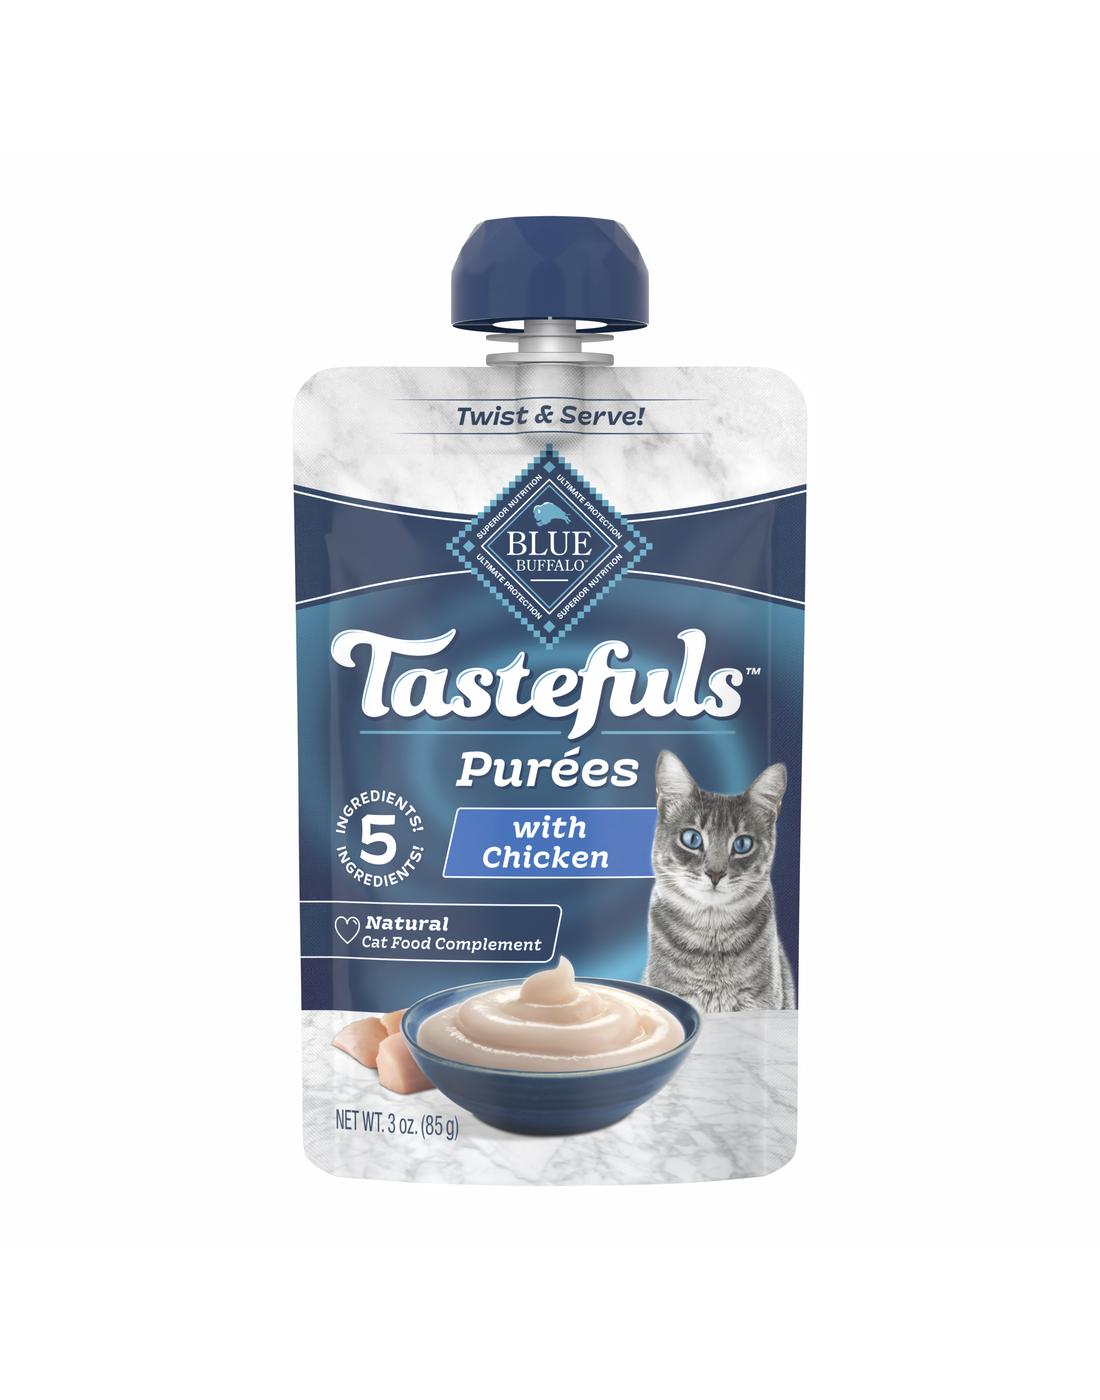 Blue Buffalo Tastefuls Purees Chicken Wet Cat Food Complement; image 1 of 2